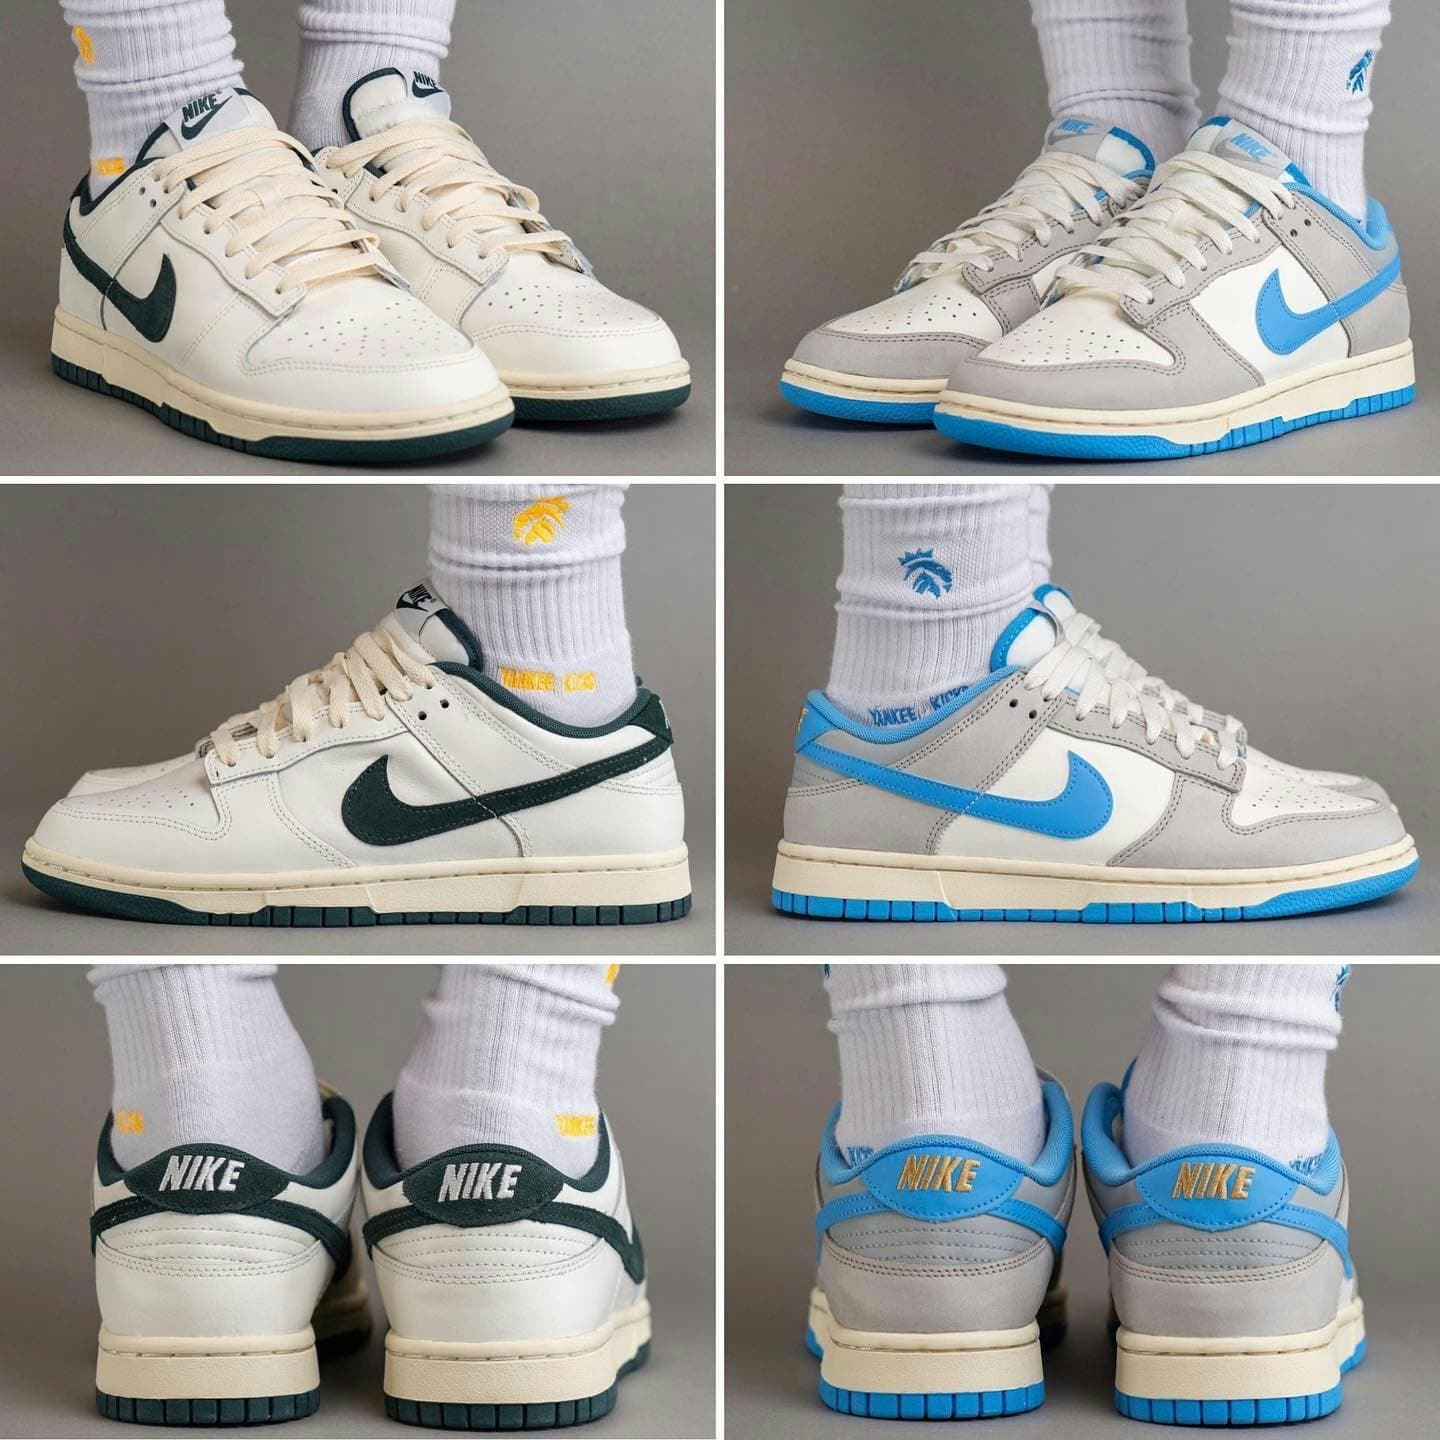 Nike Dunk Low "Athletic Department"-Pack